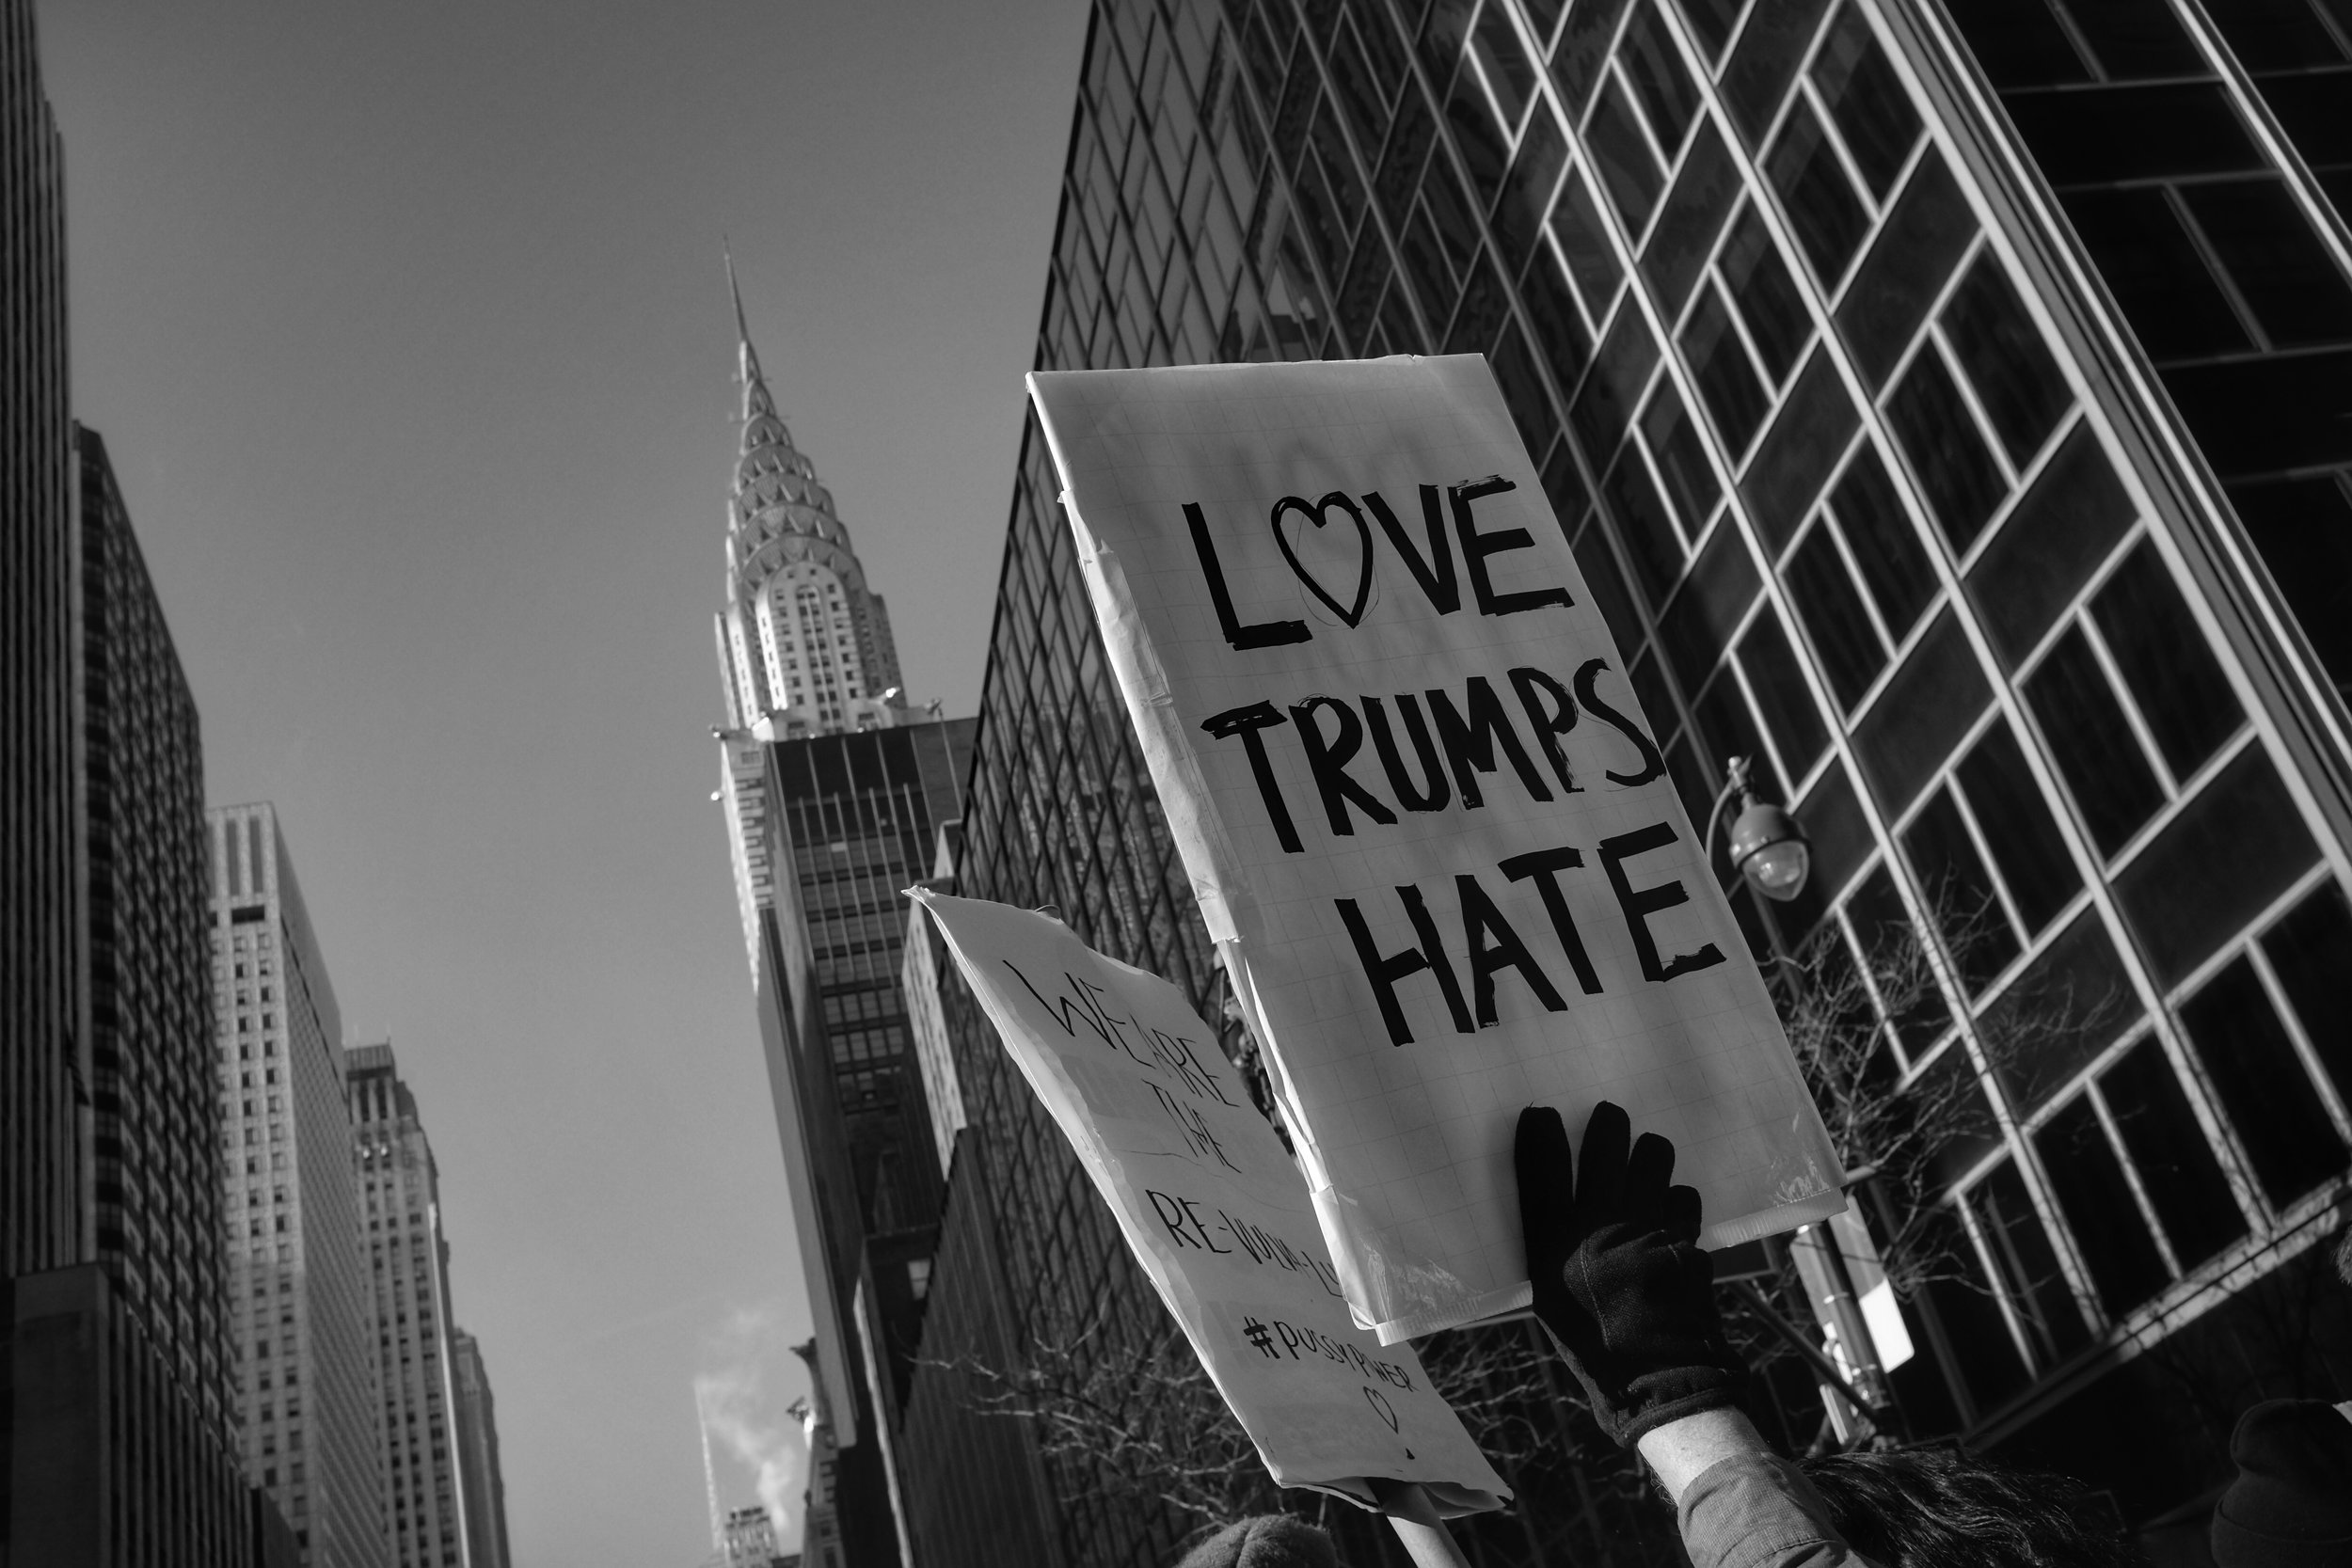 Woman's March on New York City. Midtown Manhattan. NYC. 1.21.17